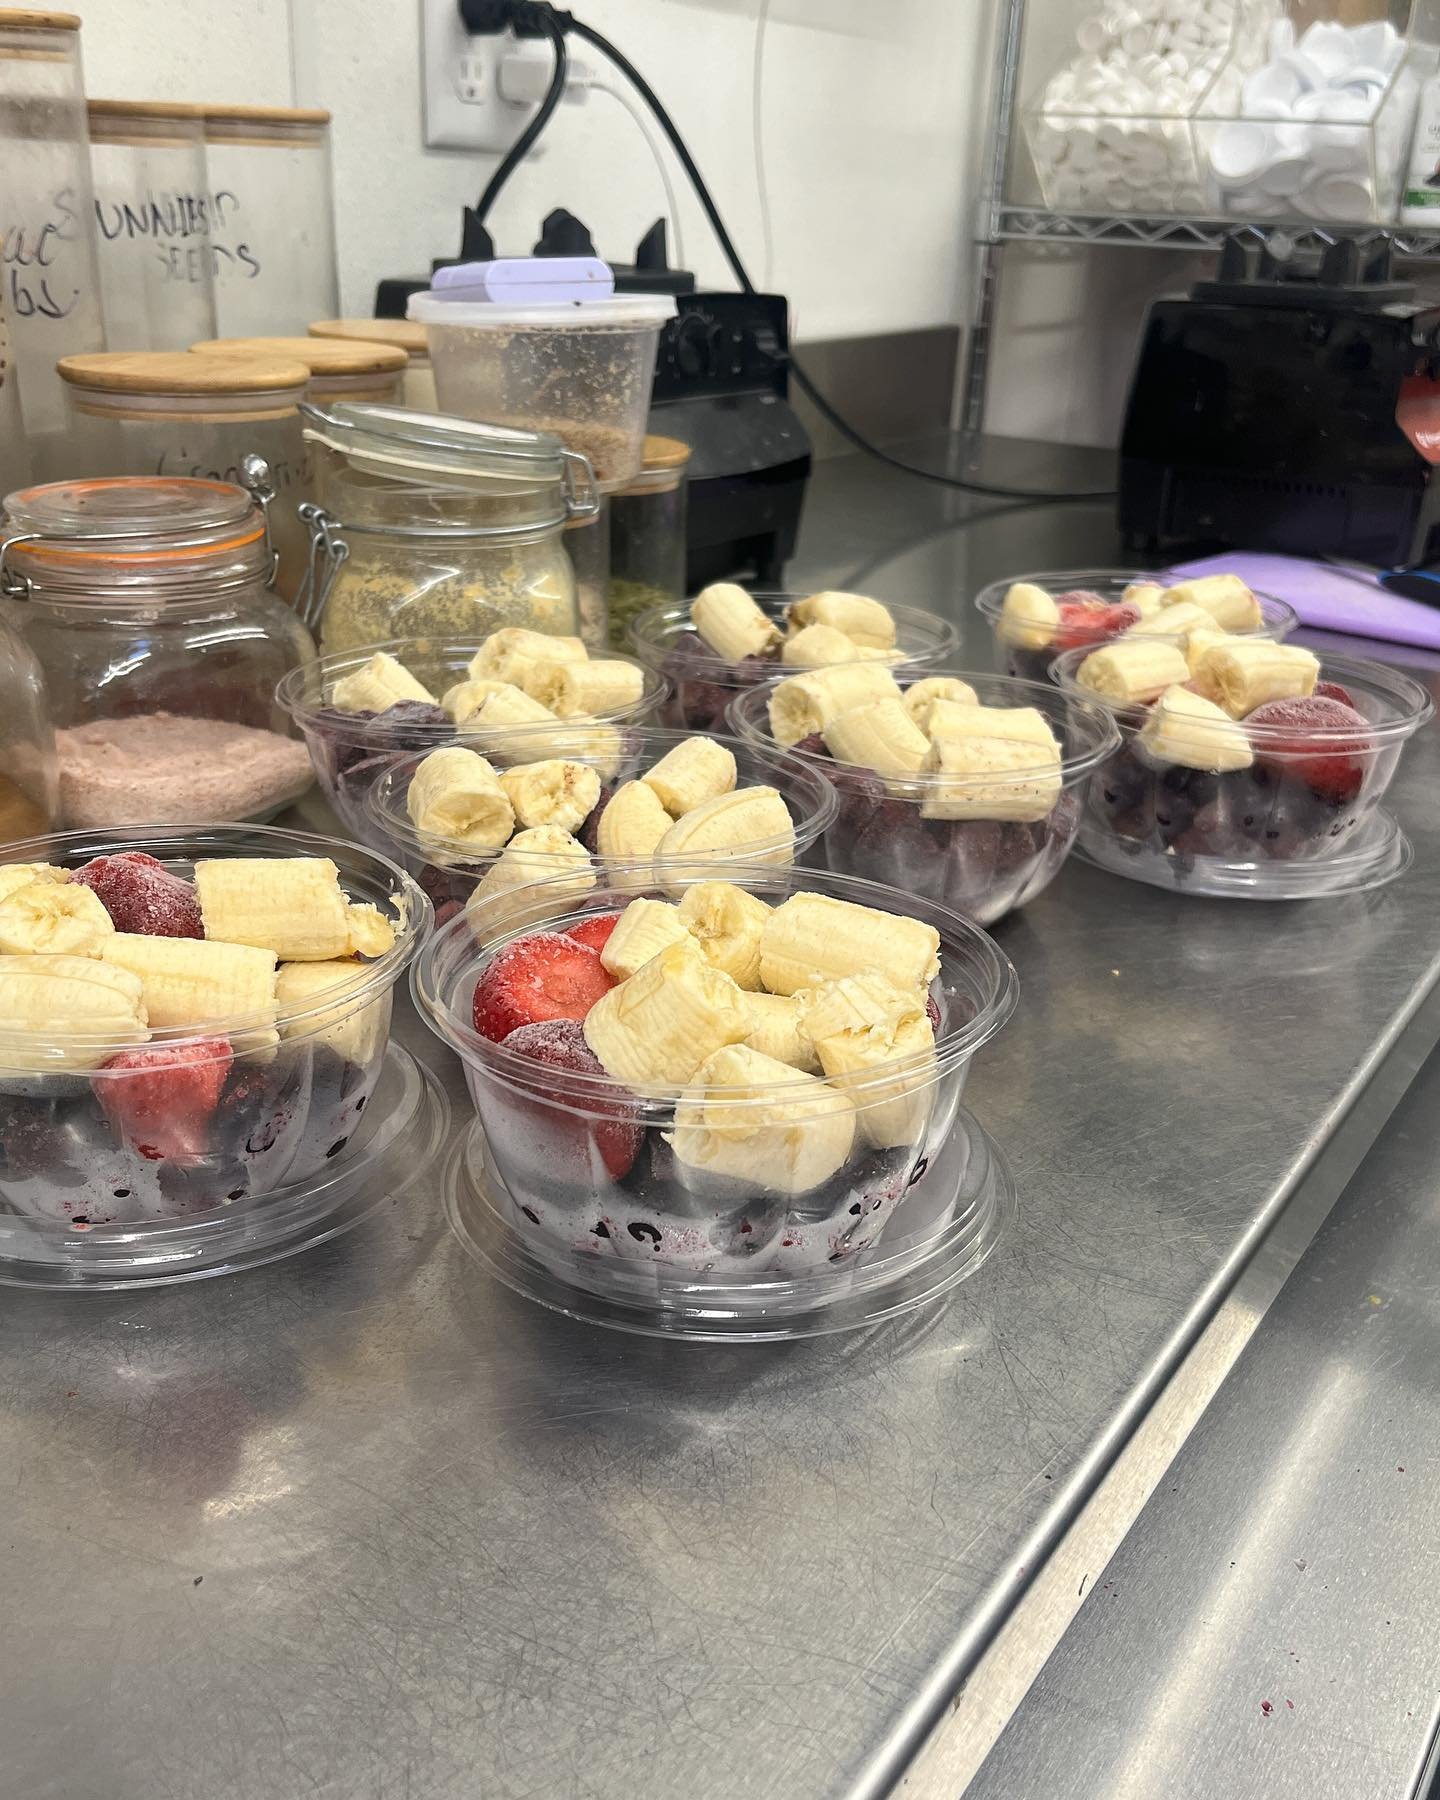 Prepping some delicious berry blast bowls! 

#smoothiebowl #acai #smoothie #juicery #coldpressed #veganpittsburgh #cafe